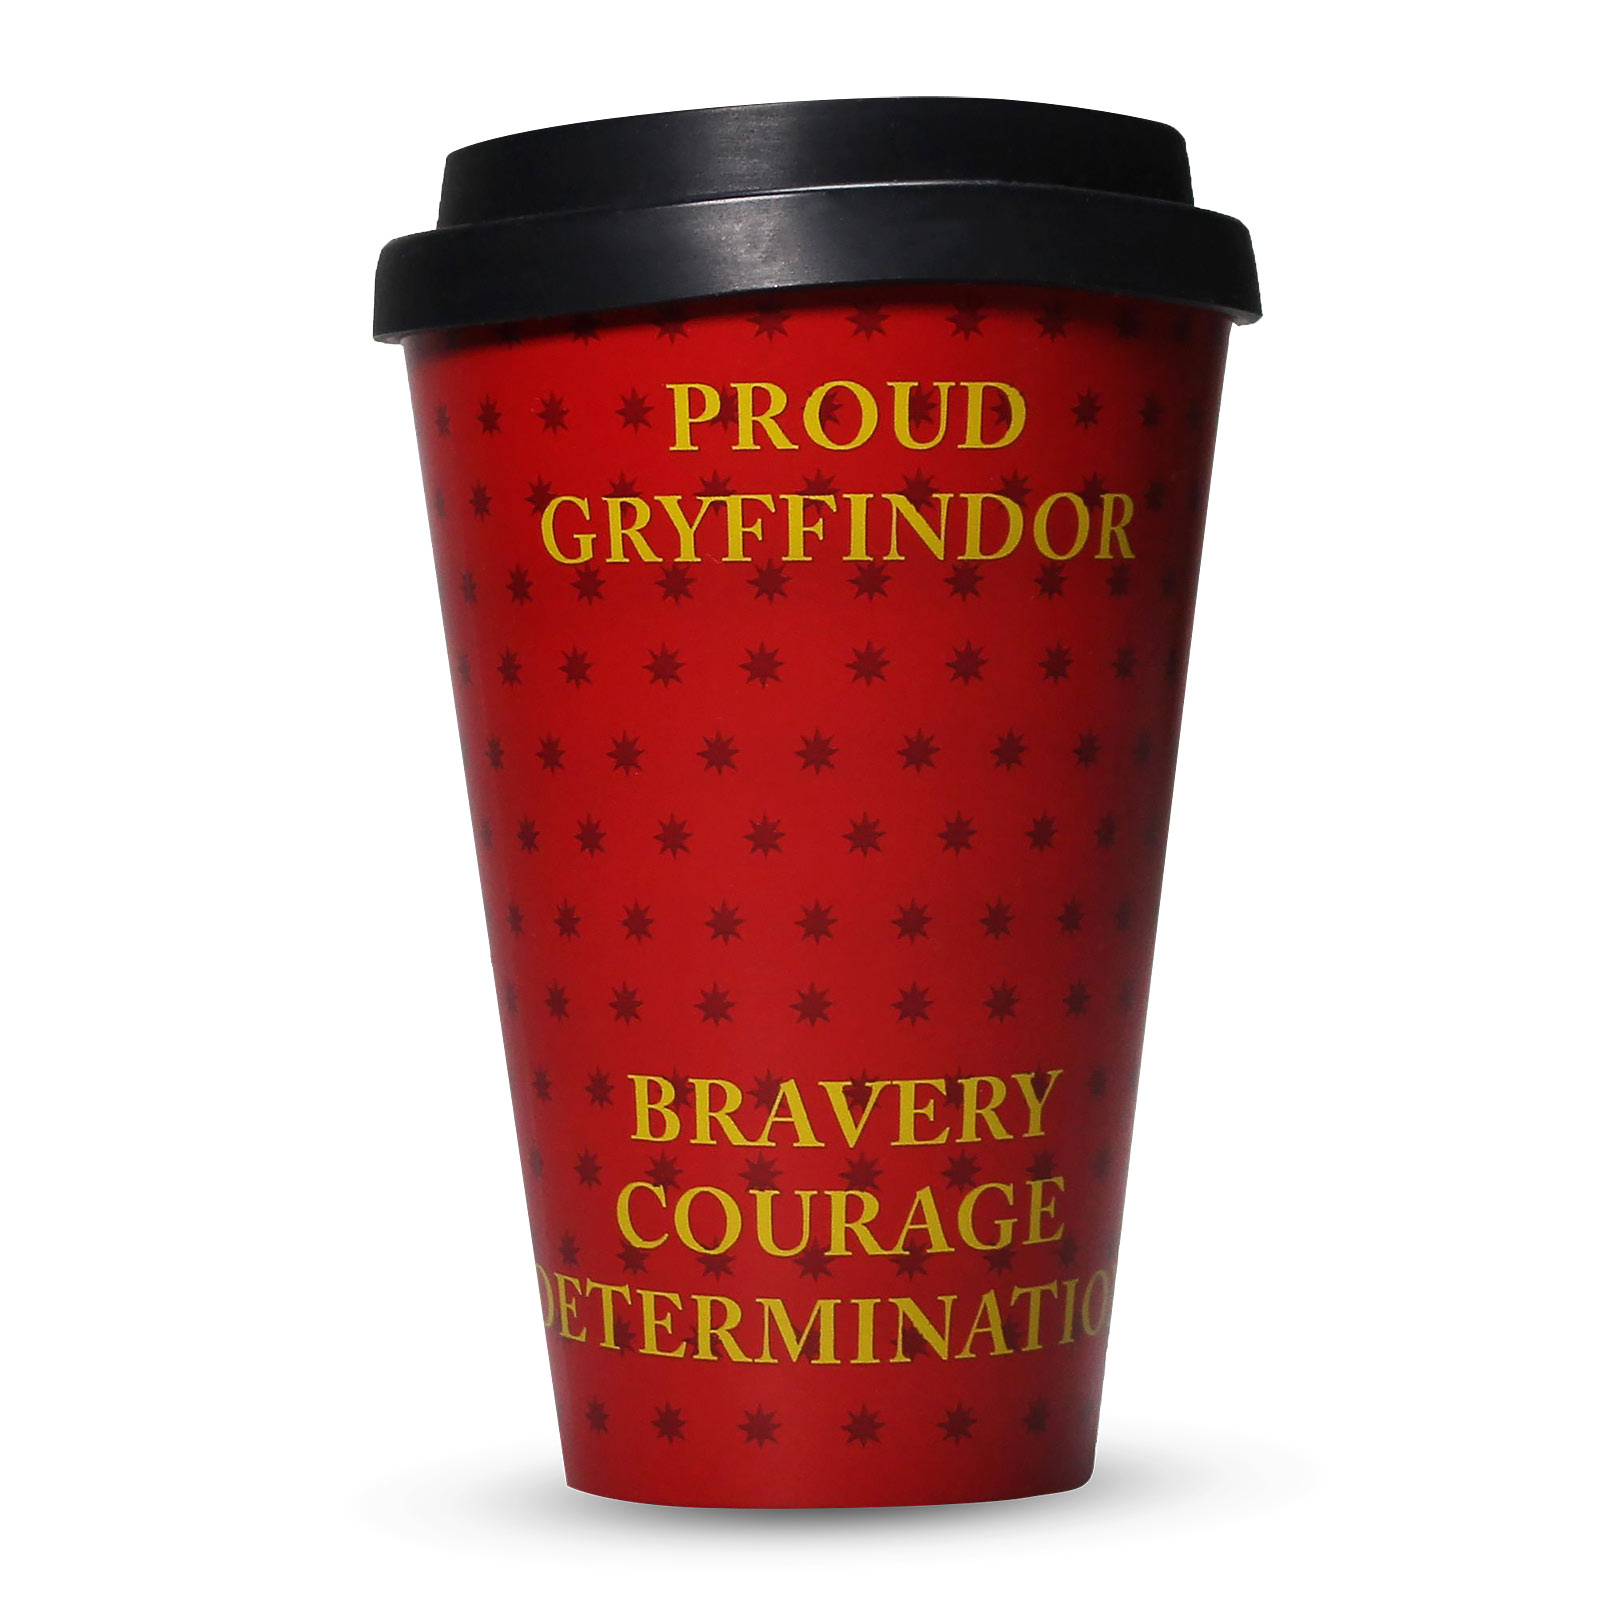 Harry Potter - Proud Gryffindor To Go Cup